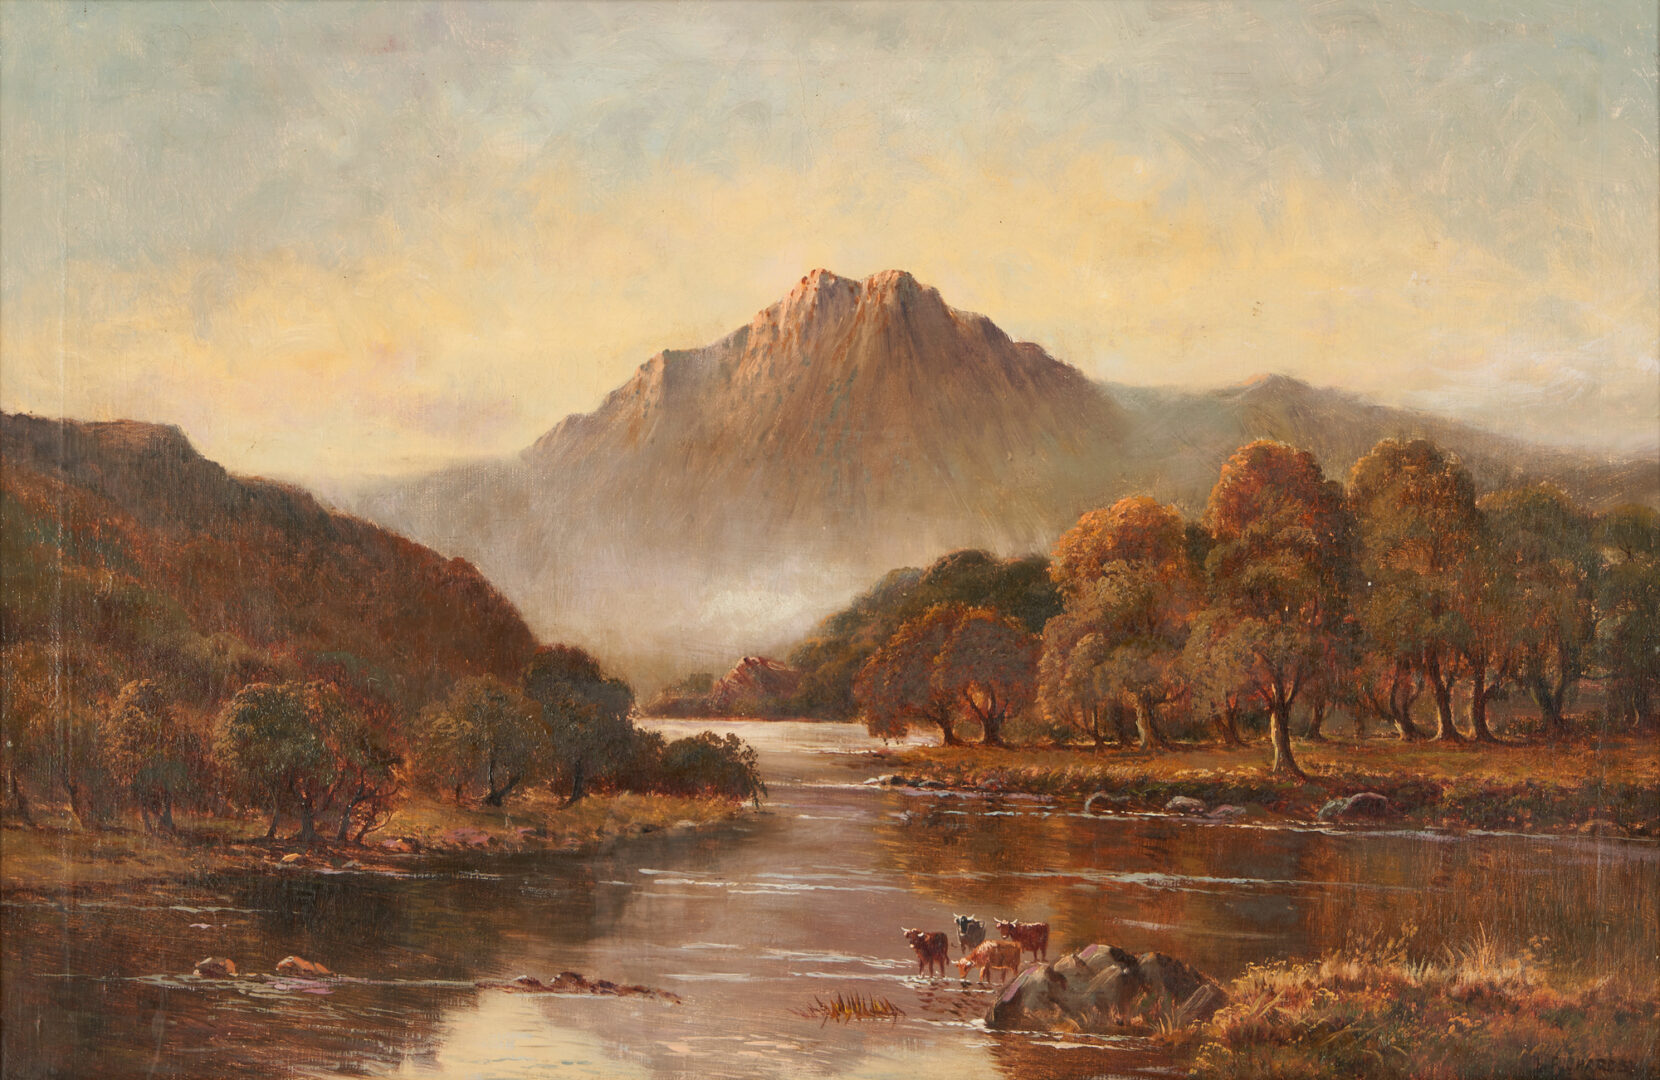 Lot 1053: Daniel Sherrin O/C Painting, Mountain and River Landscape